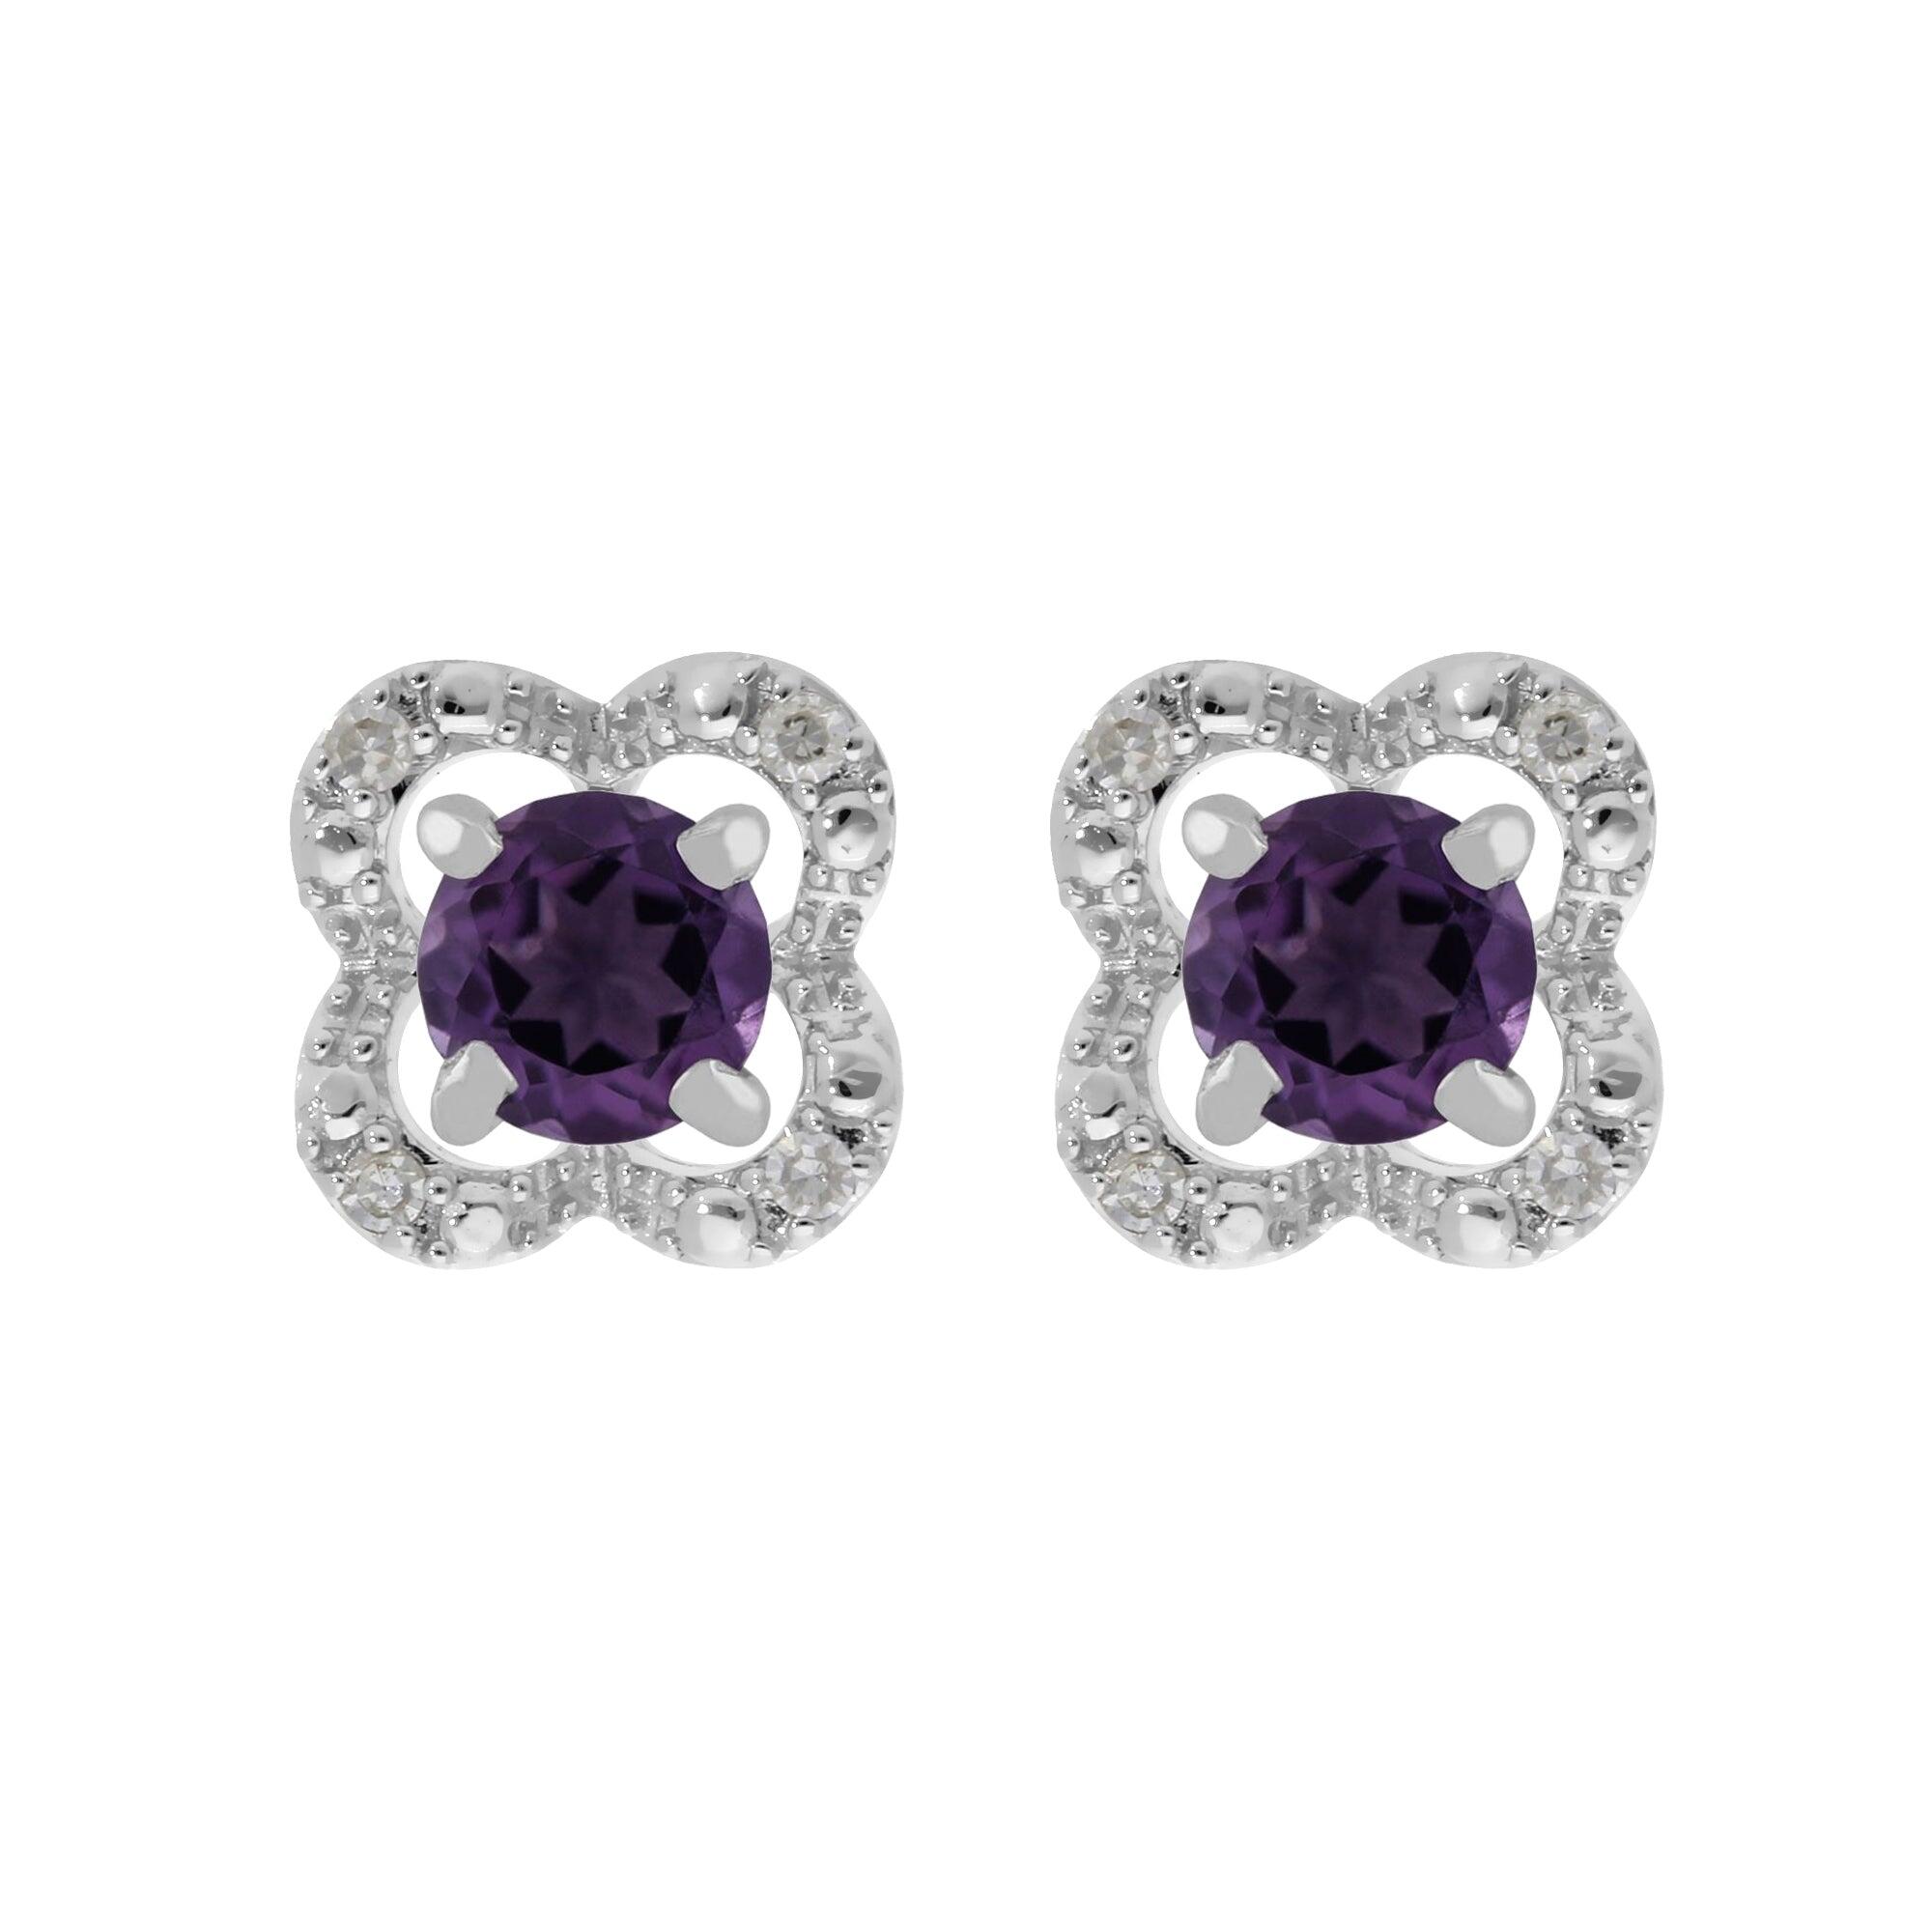 Classic Round Amethyst Stud Earrings with Detachable Diamond Flower Ear Jacket in 9ct White Gold